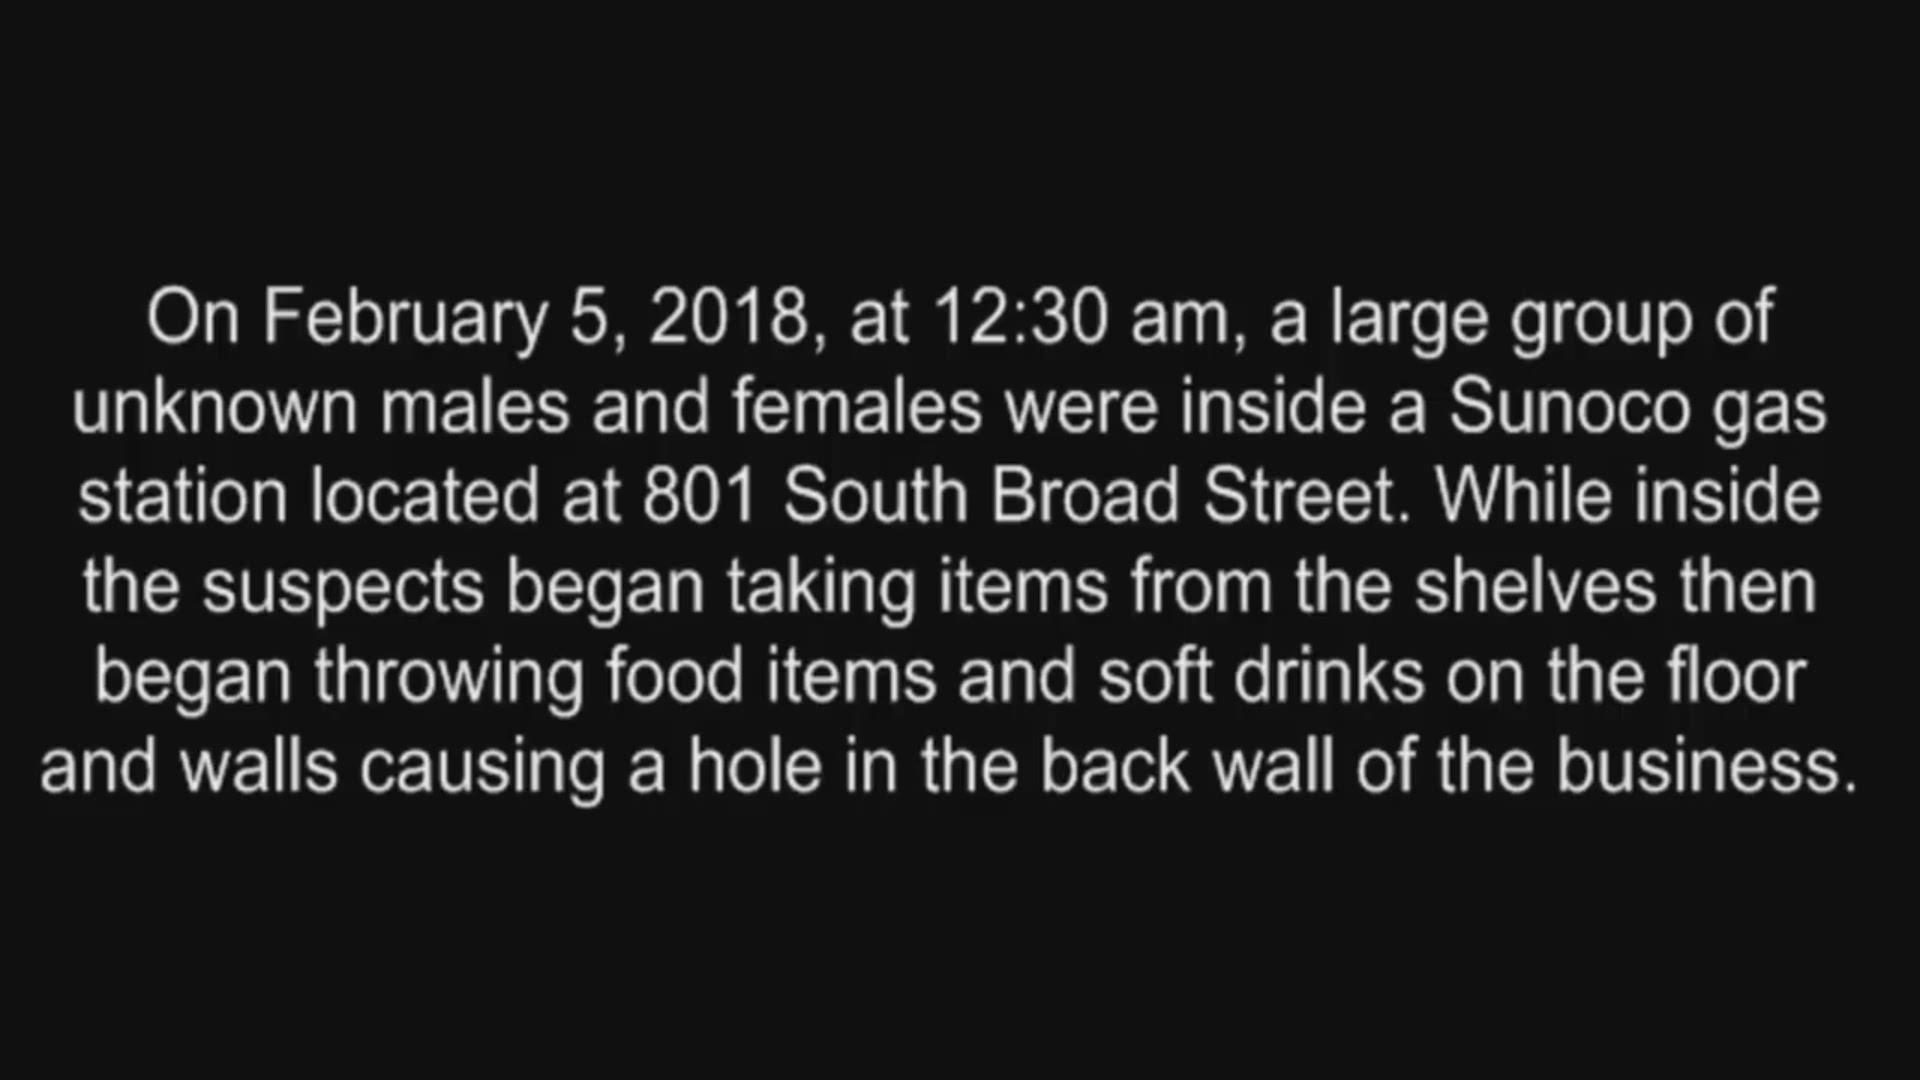 On February 5, 2018, at 12:30 am, a large group of unknown males and females were inside a Sunoco gas station located at 801 South Broad Street. While inside the suspects began taking items from the shelves then began throwing food items and soft drinks o